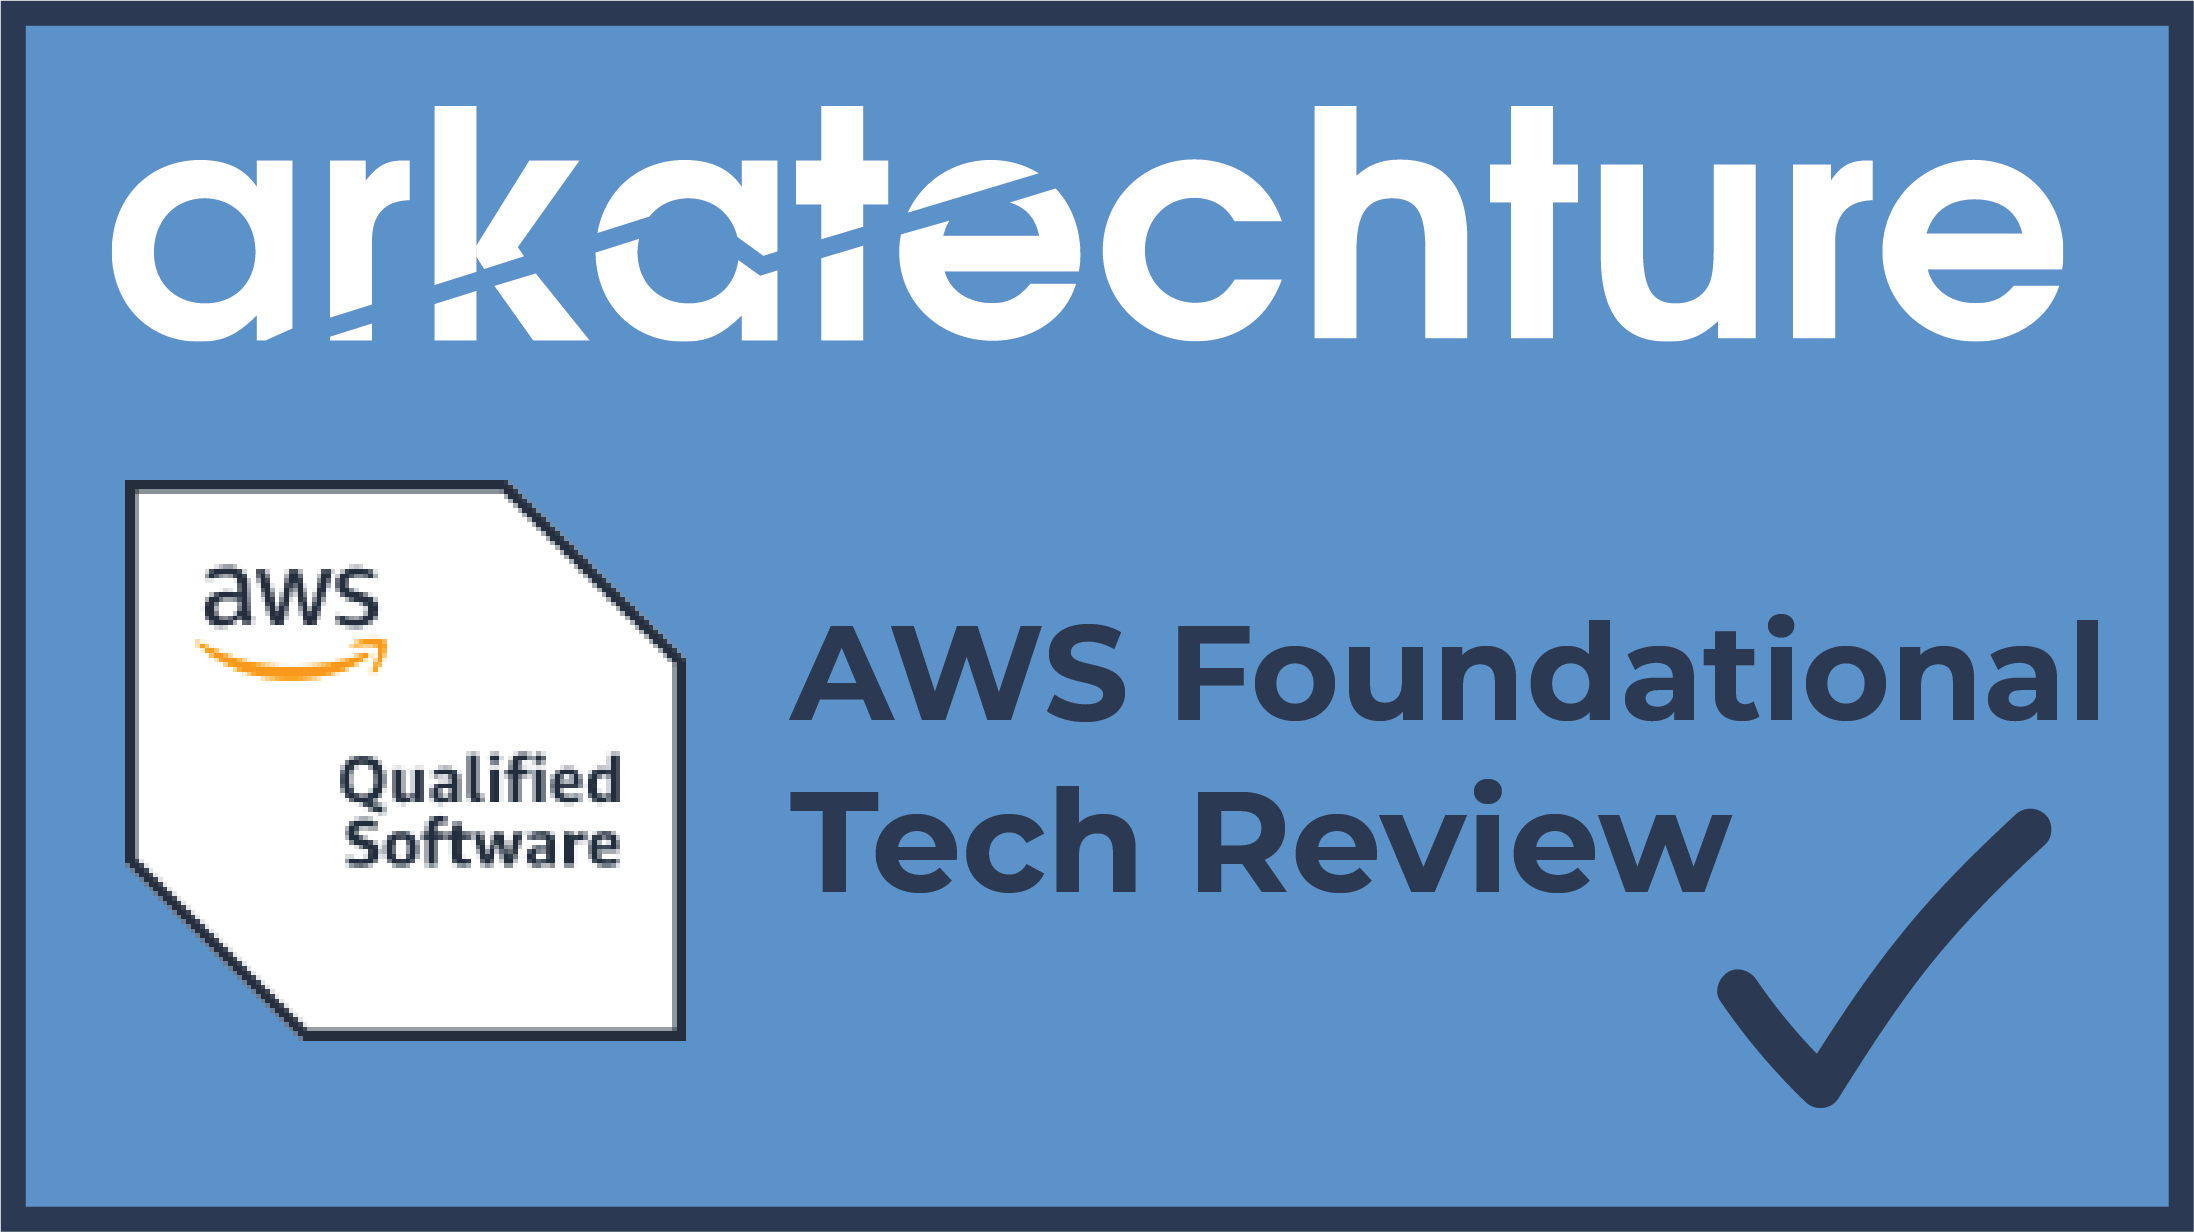 Arkatechture Completes AWS Foundational Tech Review